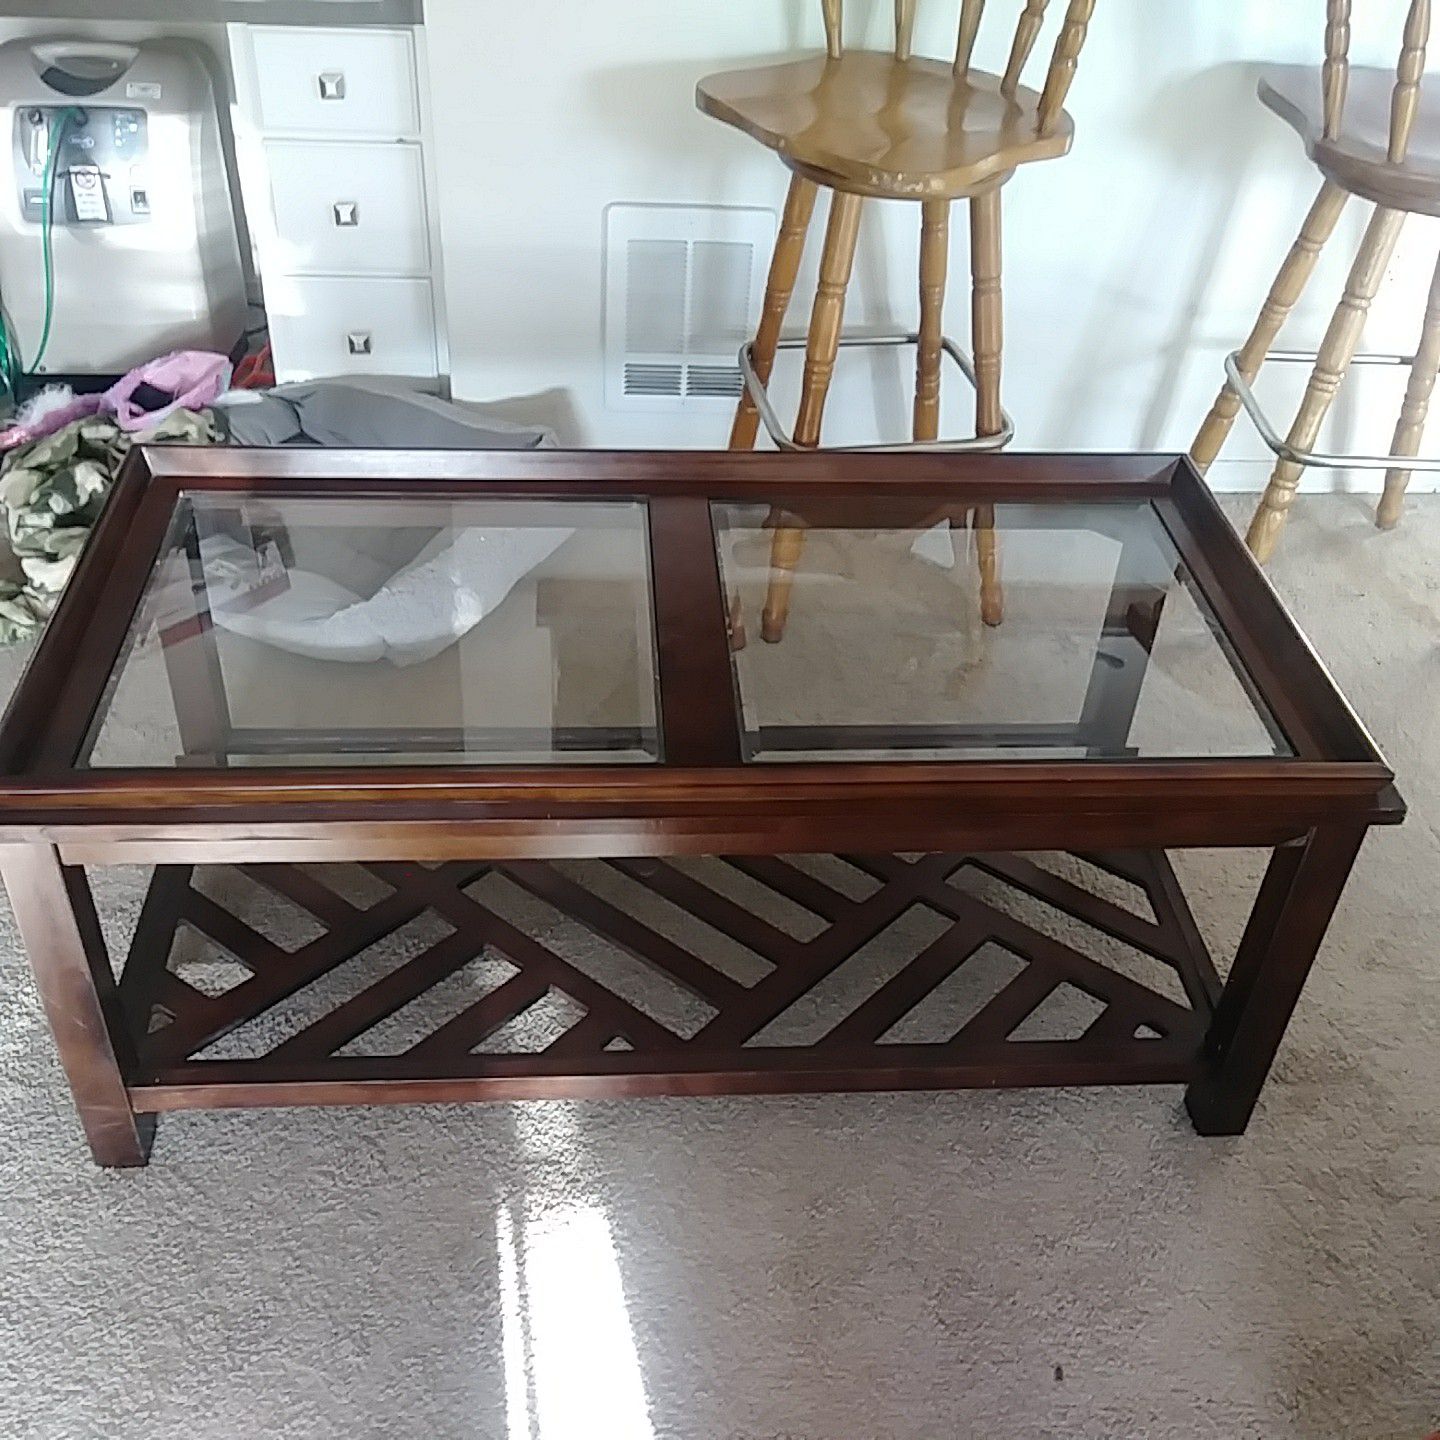 Coffee table wood with 2 glass inlays